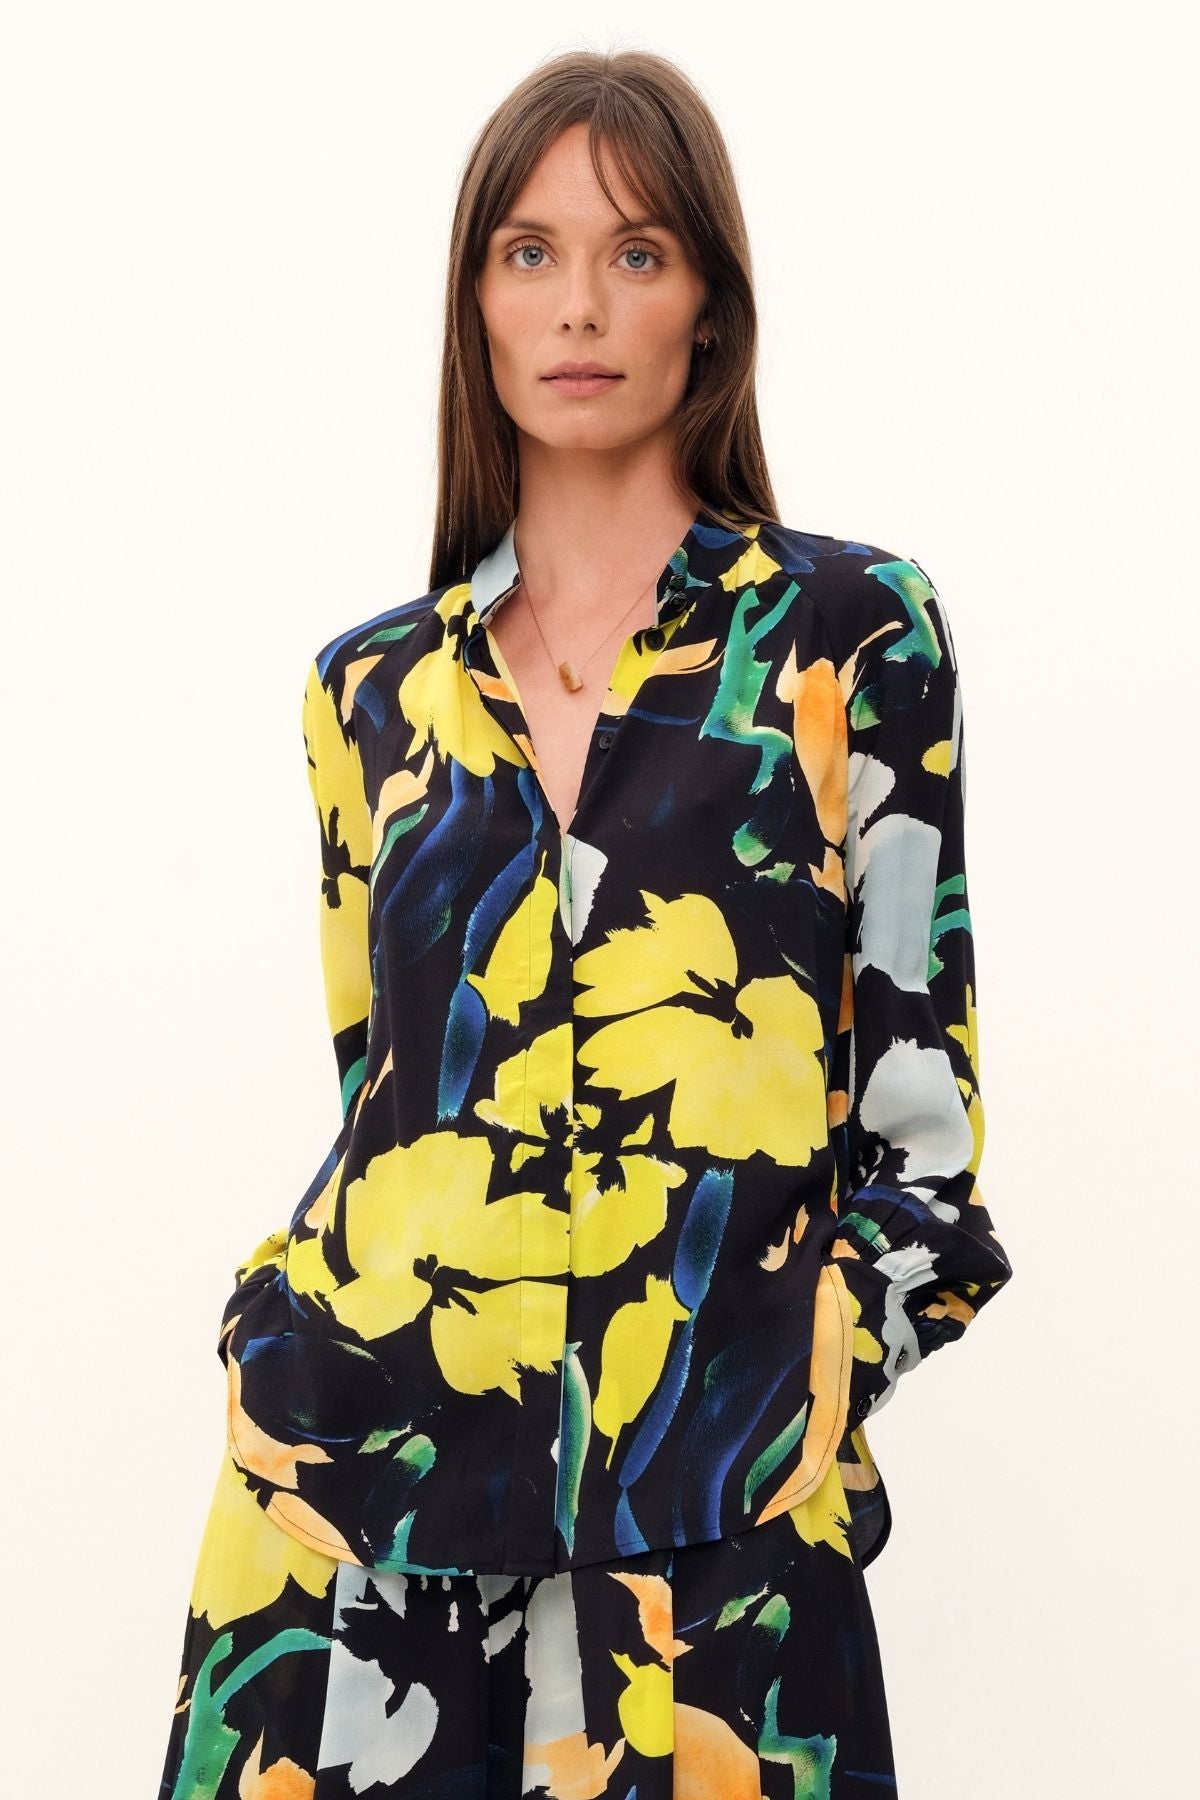 The Silk Hereafter Blouse by GINGER & SMART with a Artful floral print, pastel colors on rich navy base. Mandarin collar, concealed placket, full raglan long sleeve. Lightweight.